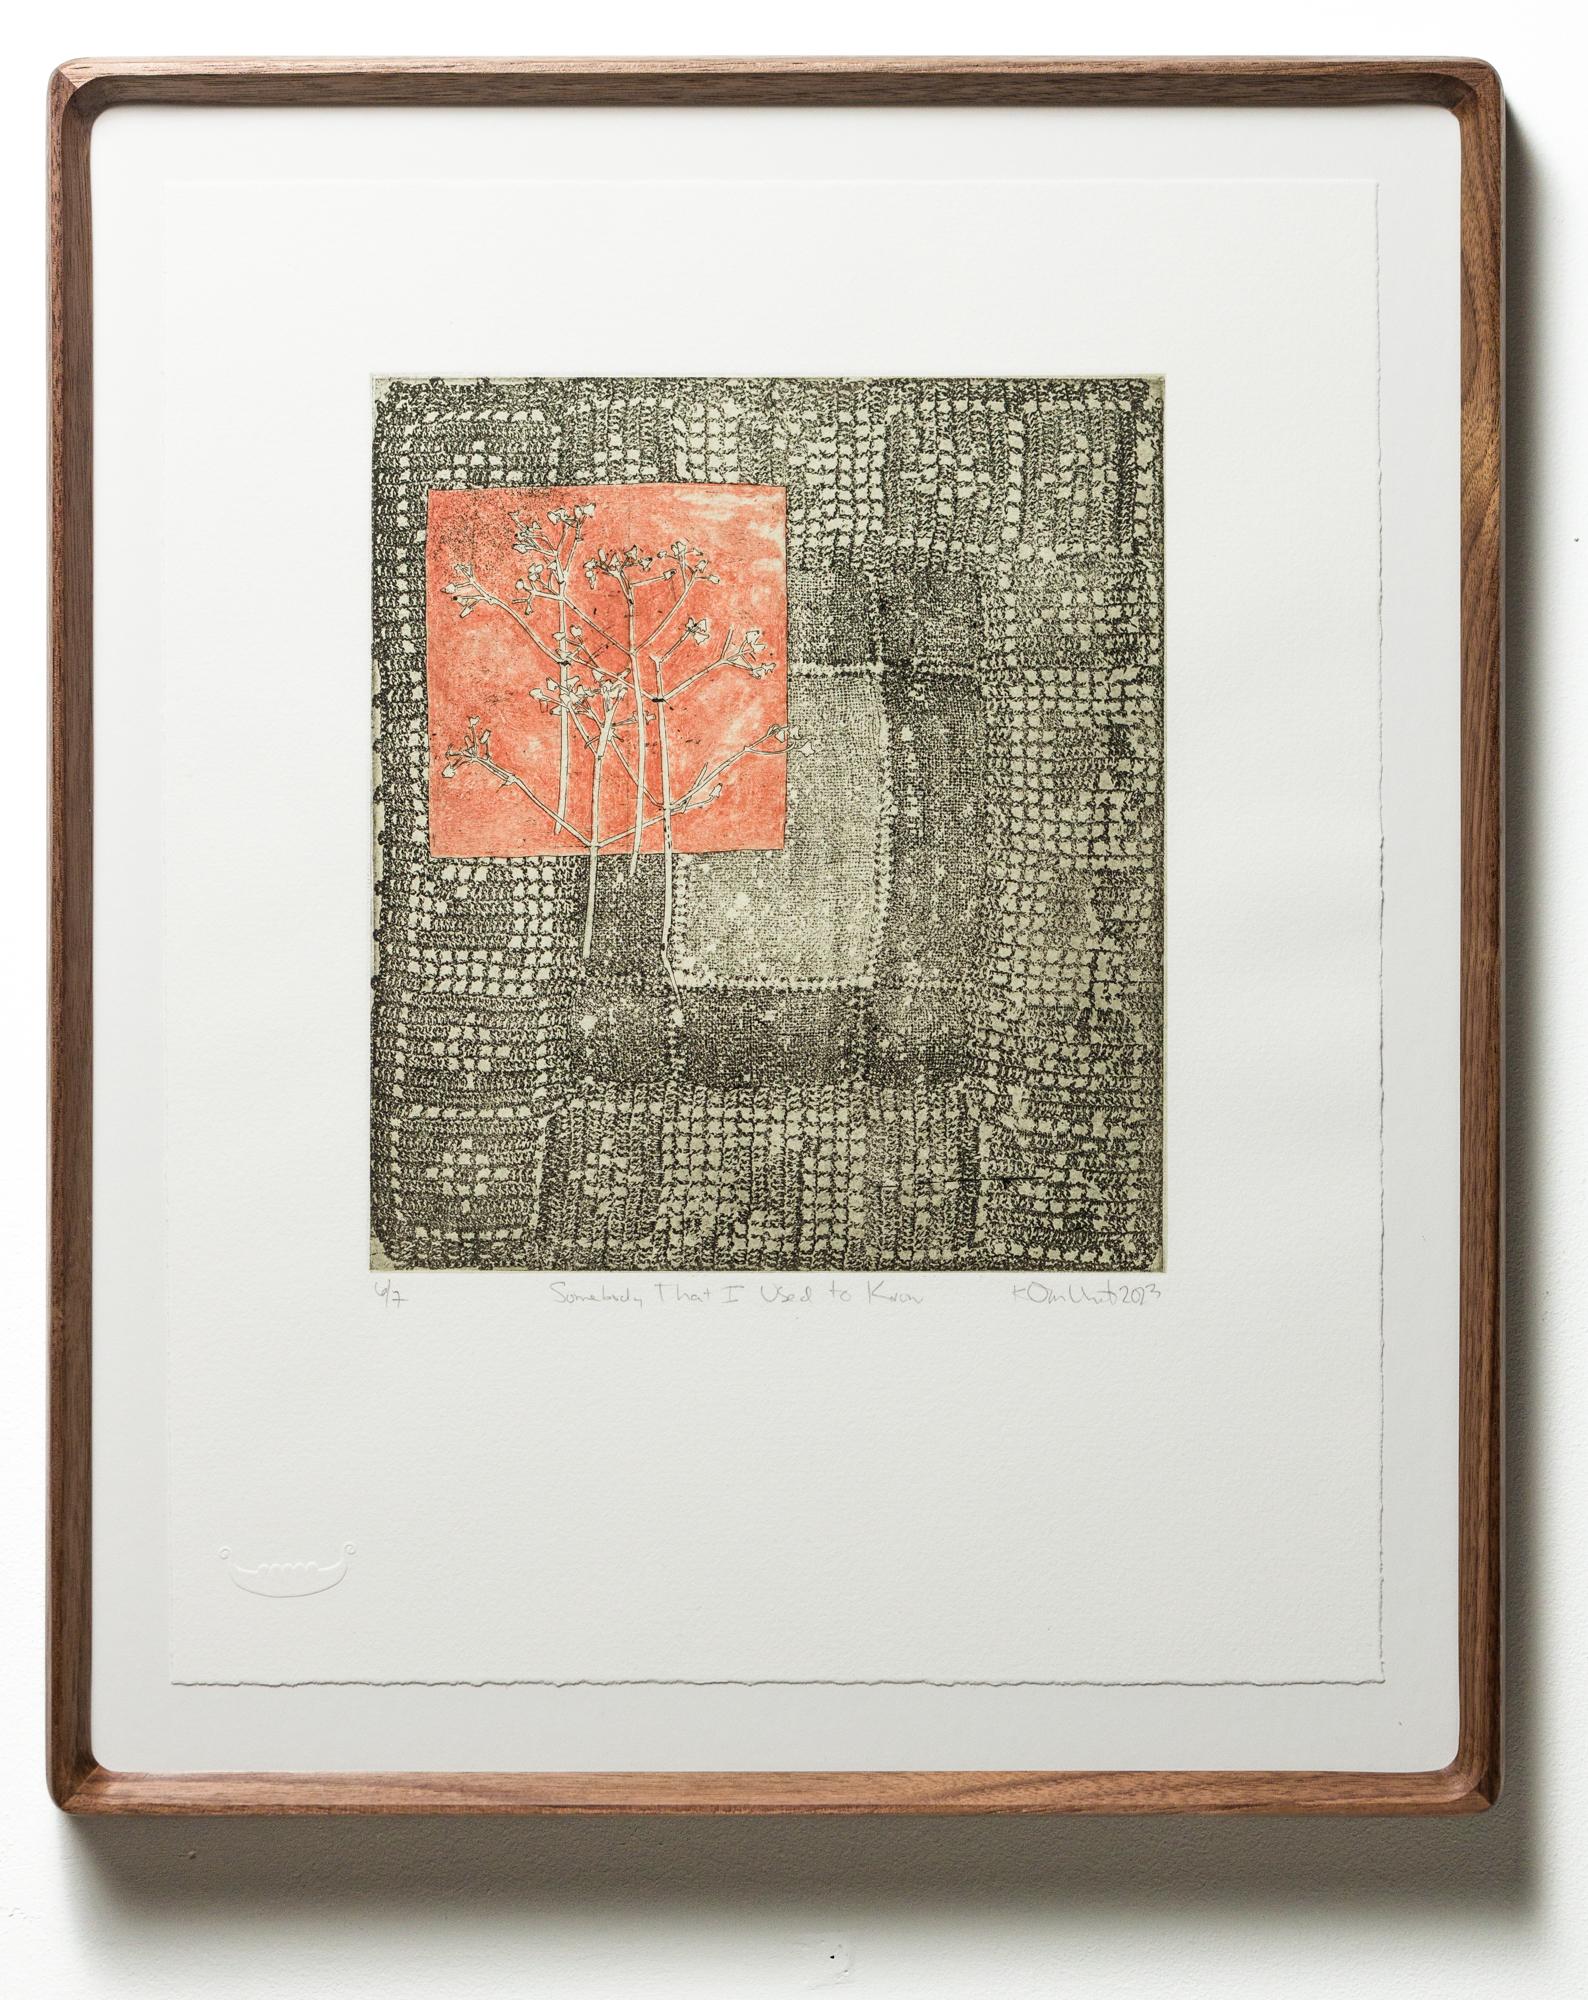 "Somebody That I Used to Know", Two Plate Intaglio Etching, Floral Motif